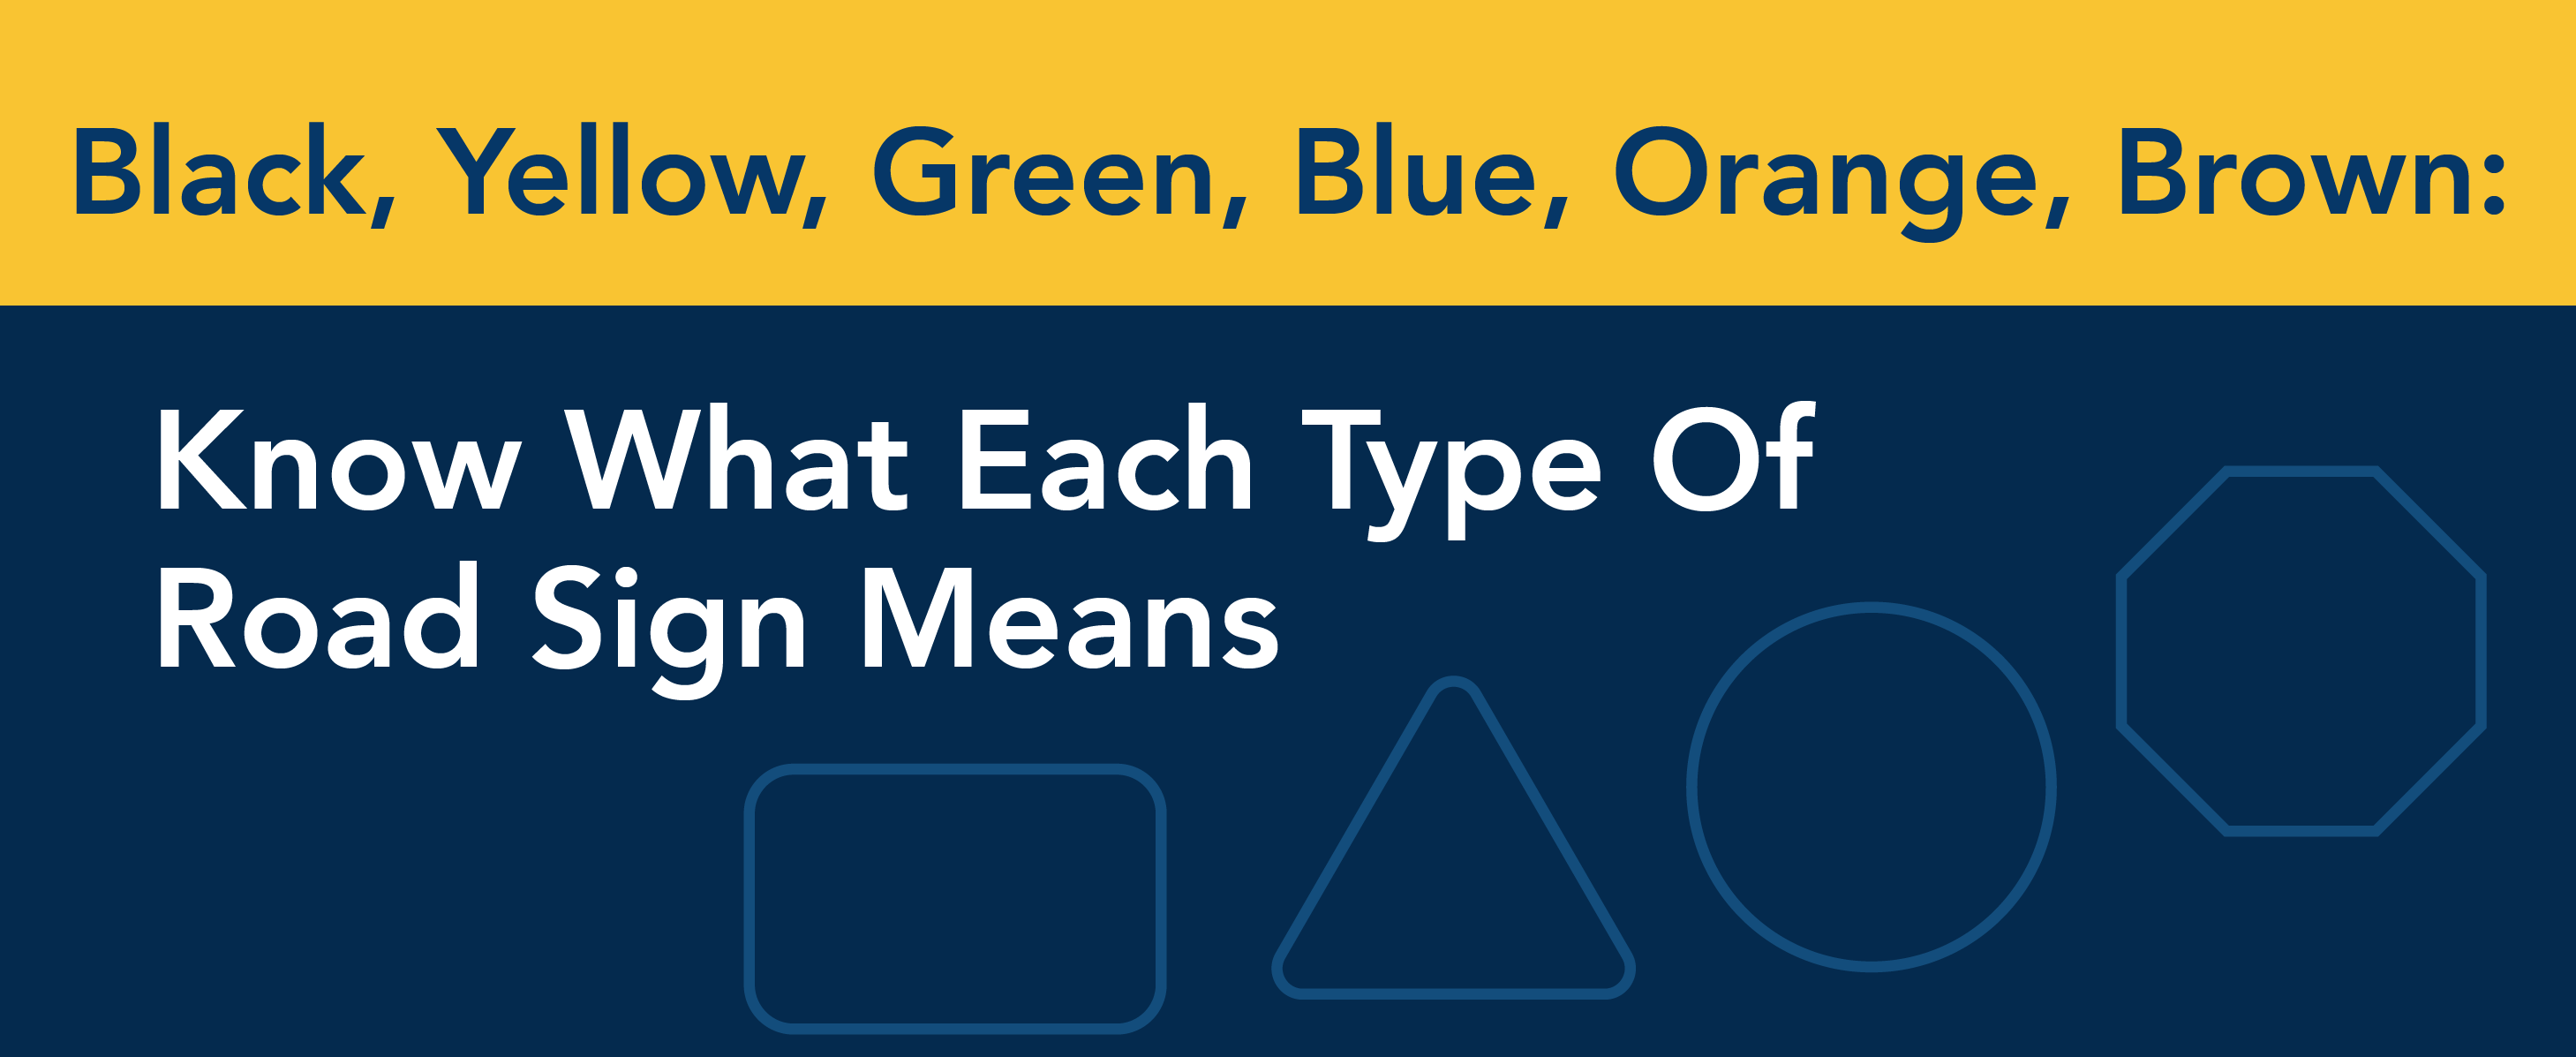 Black, Yellow, Green, Blue, Orange, Brown: Know what each type of road sign means.